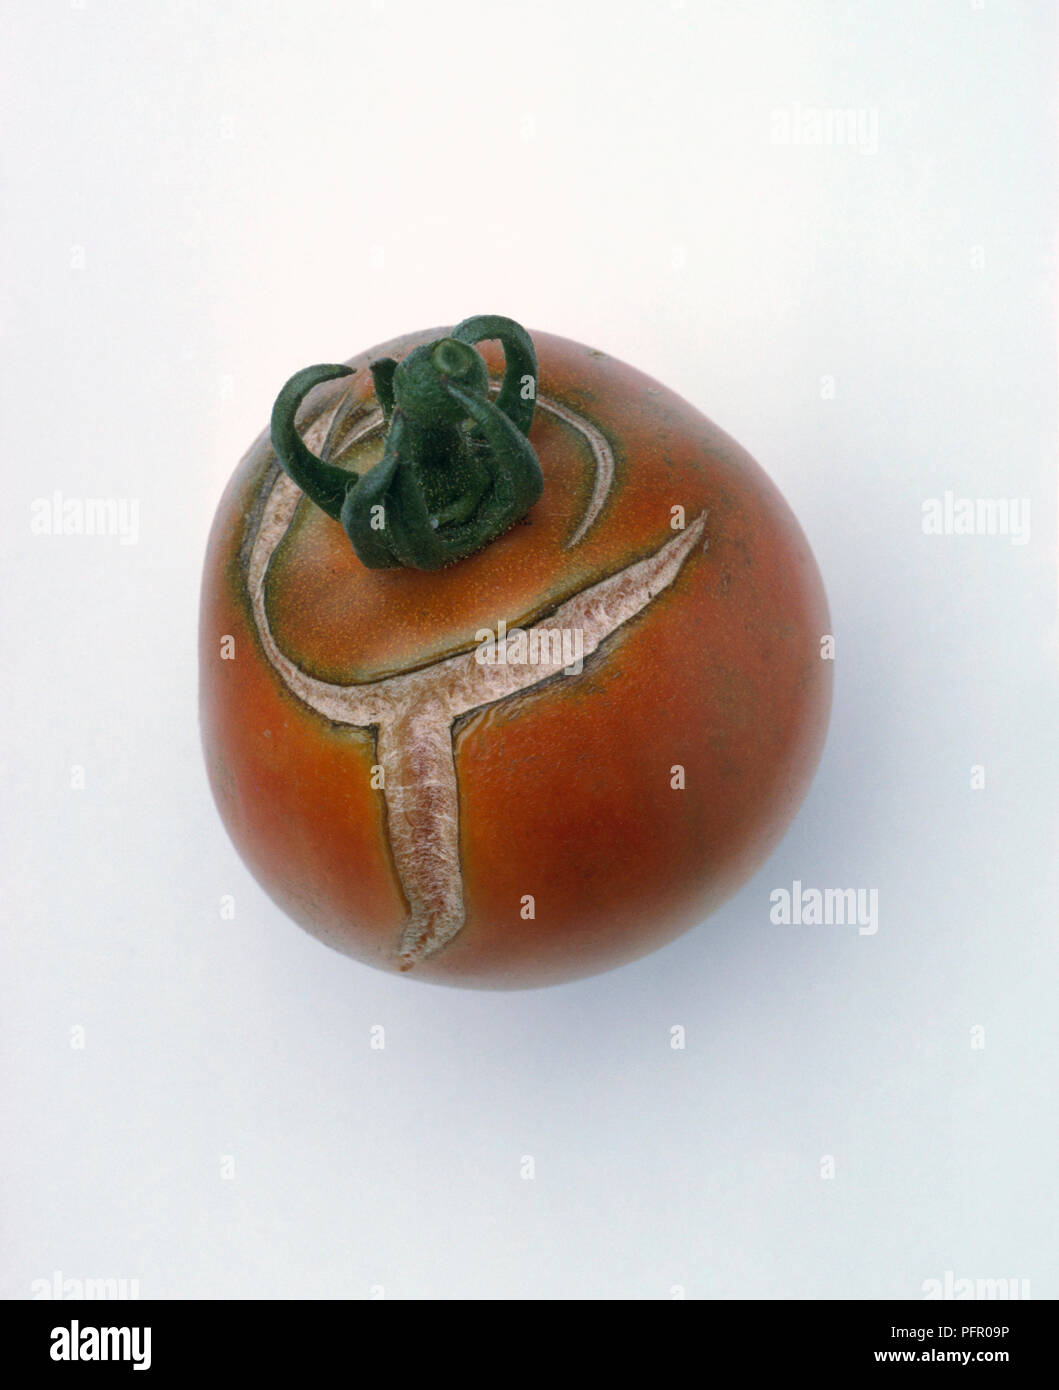 Tomato with cracked skin, due to lack of regular watering Stock Photo